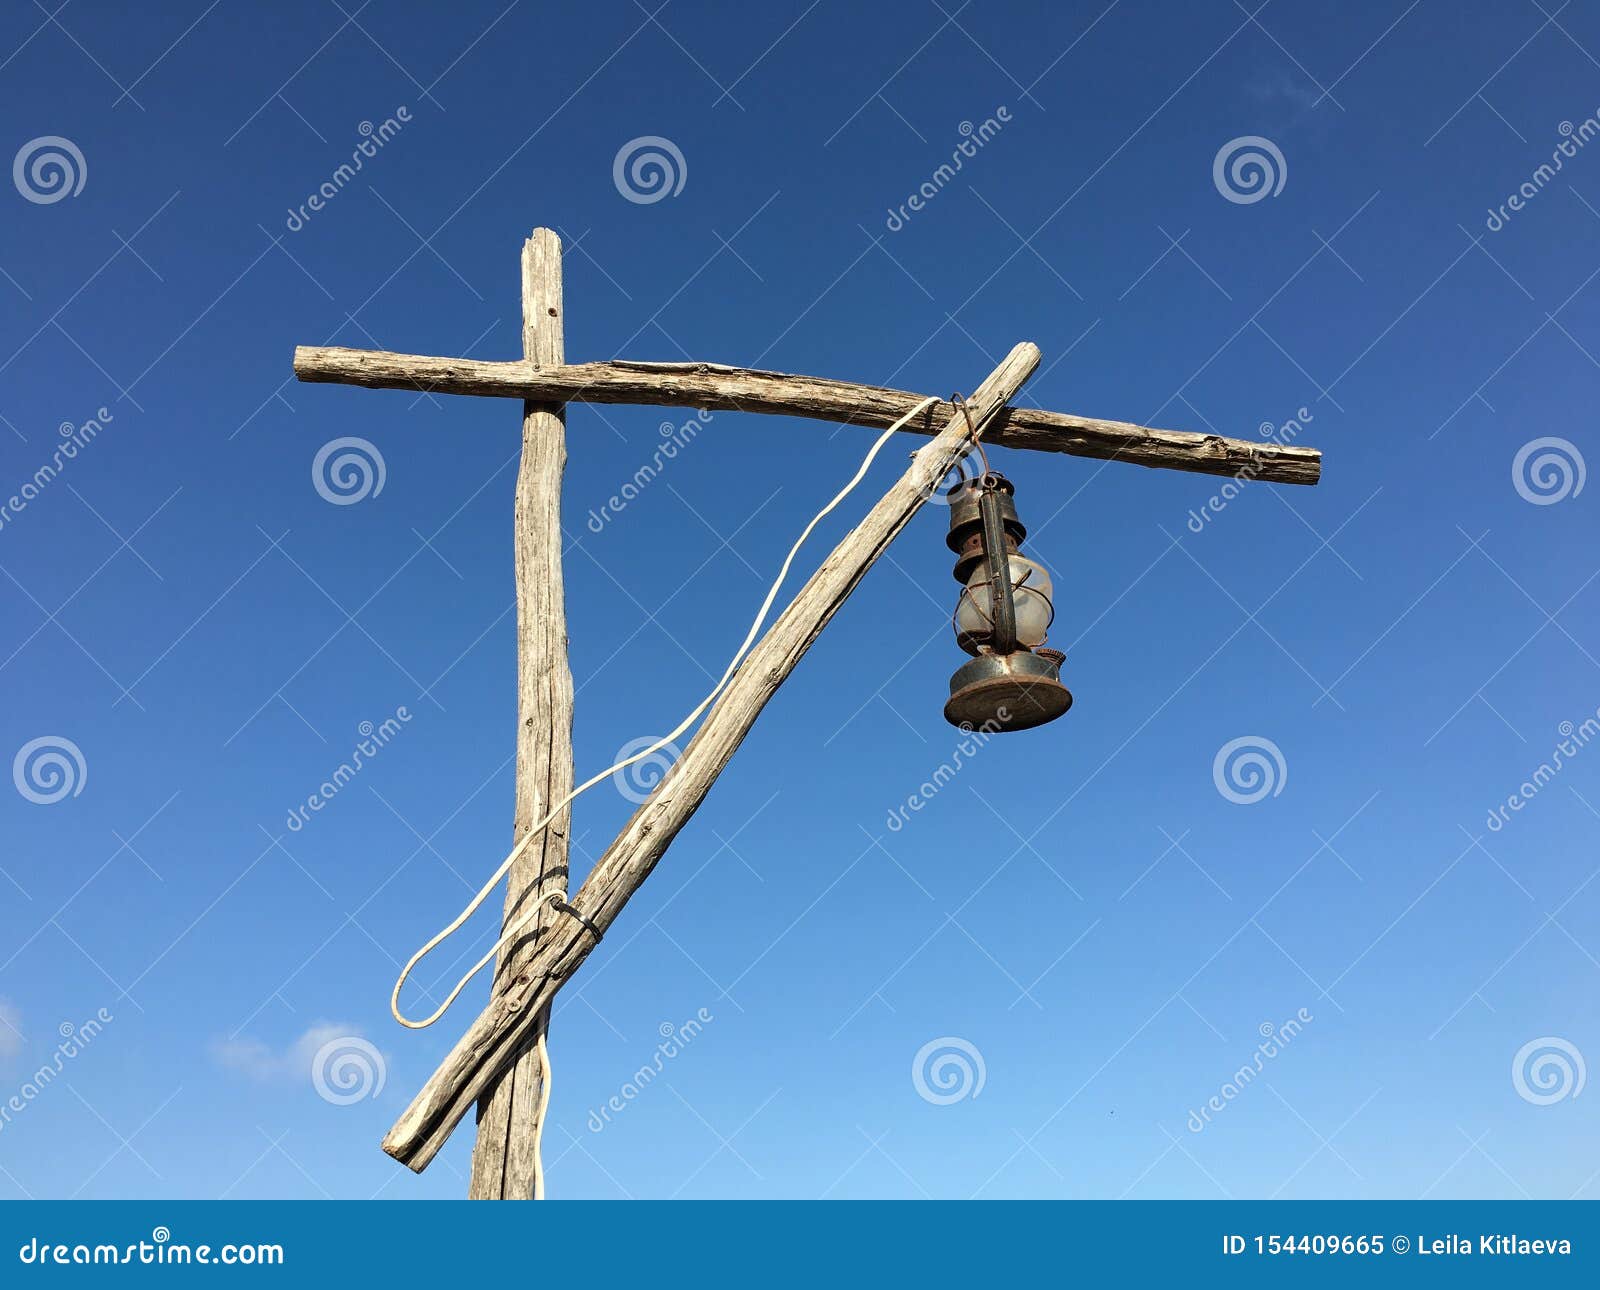 old rusty kerosene lamp with a white wire on a street wooden post crane